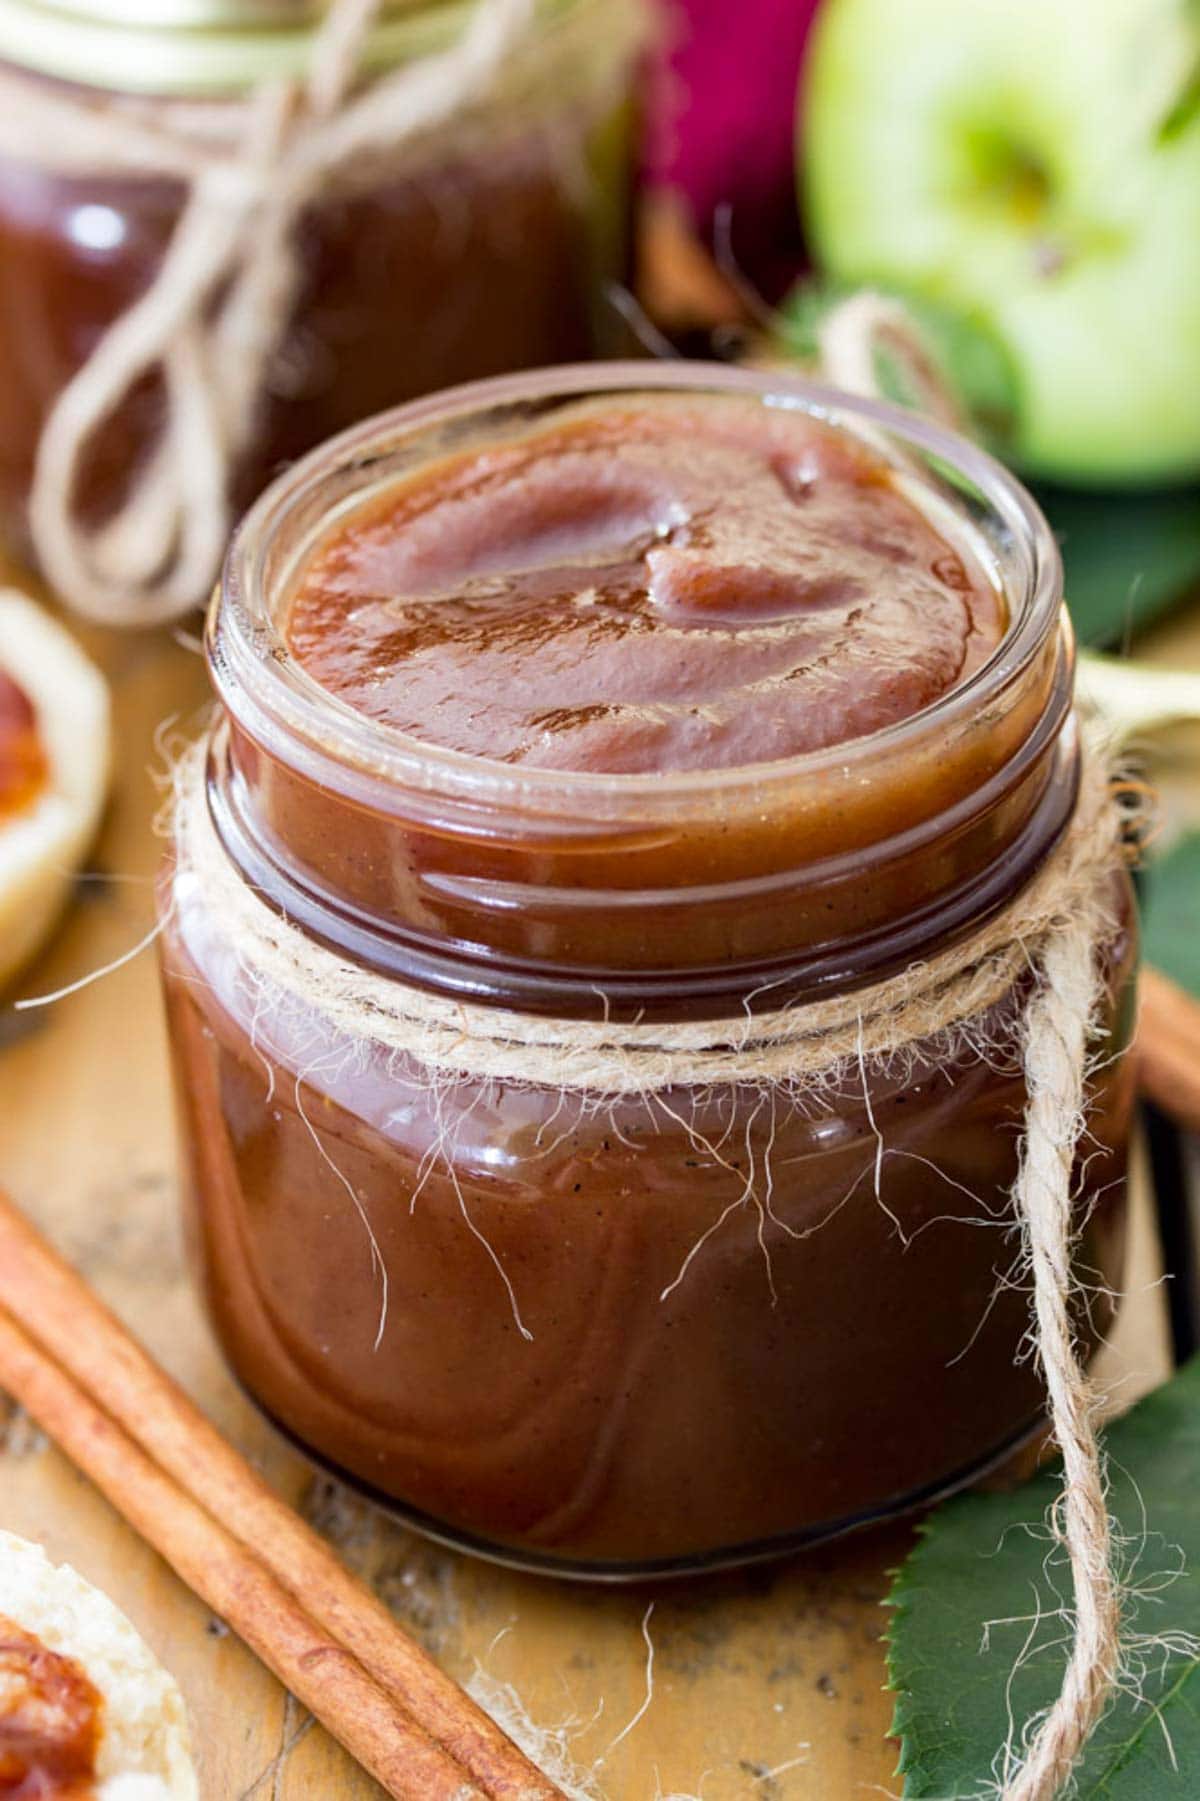 Rich brown apple butter recipe in a glass jar tied with twine